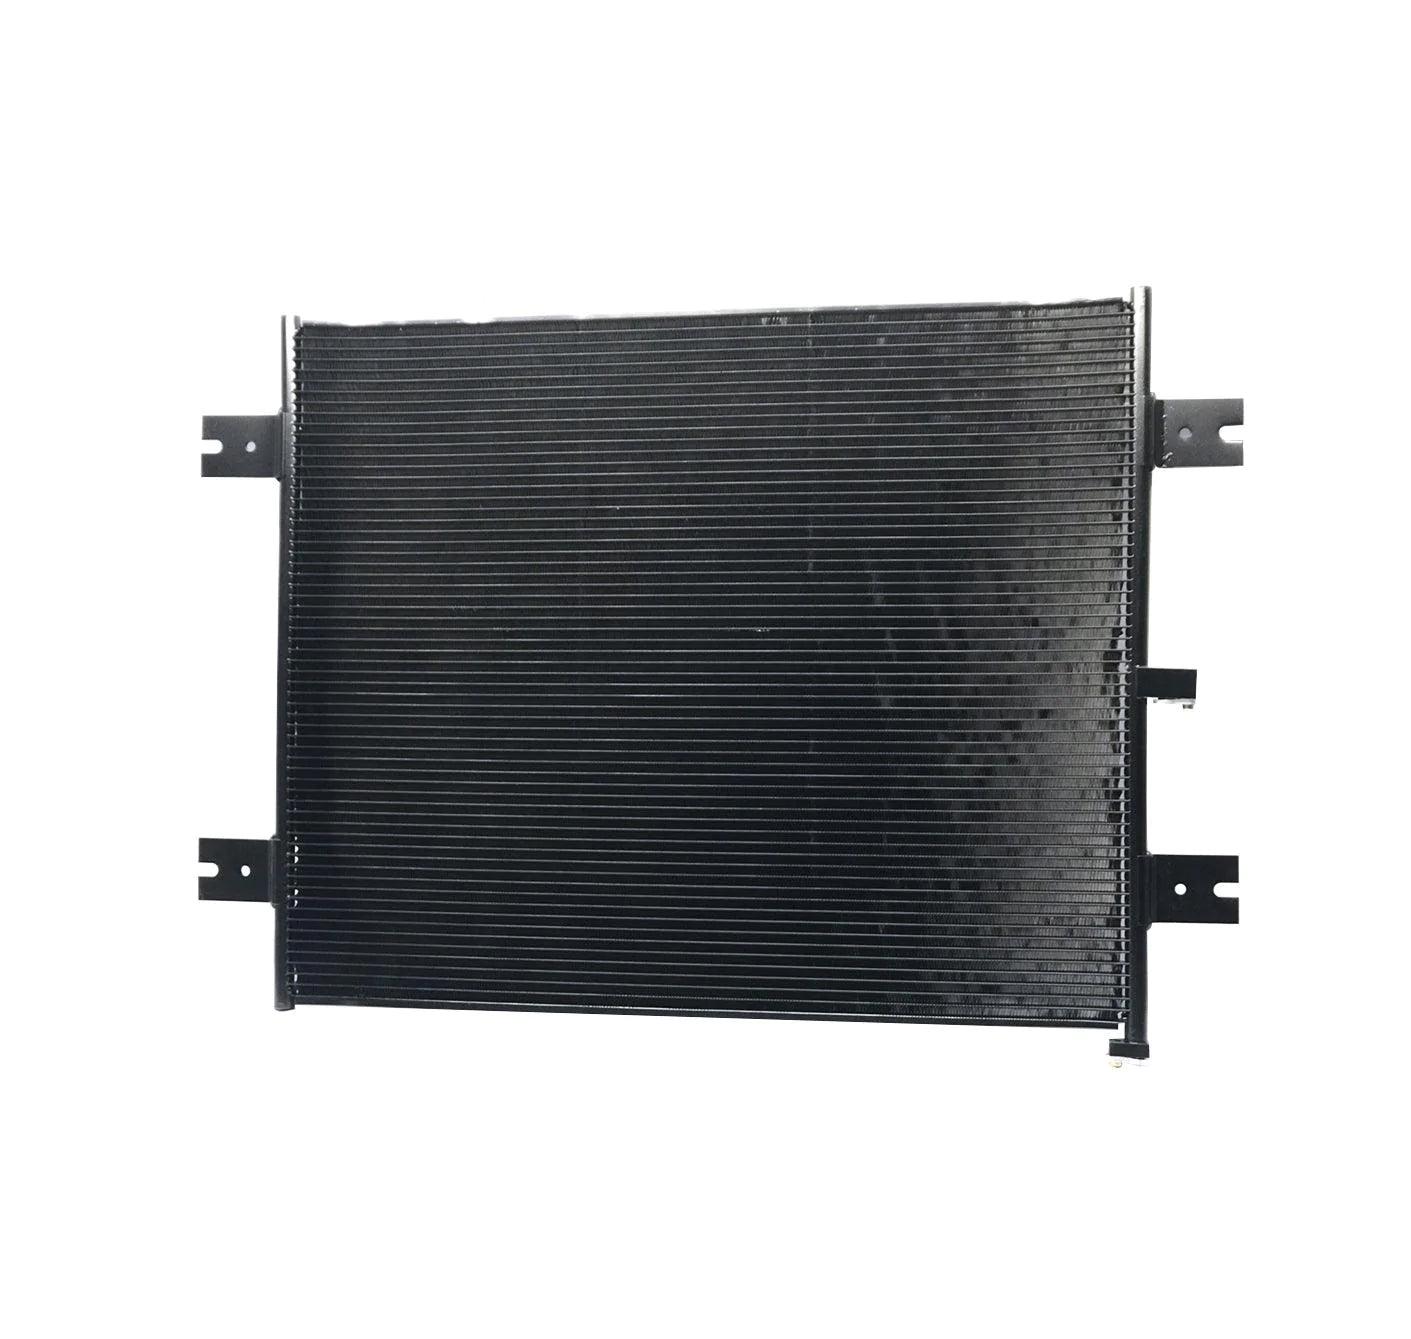 S19299 Ie4582 Newstar® / S & S A/C Air Conditioning Condenser For Peterbilt 2000 - ADVANCED TRUCK PARTS